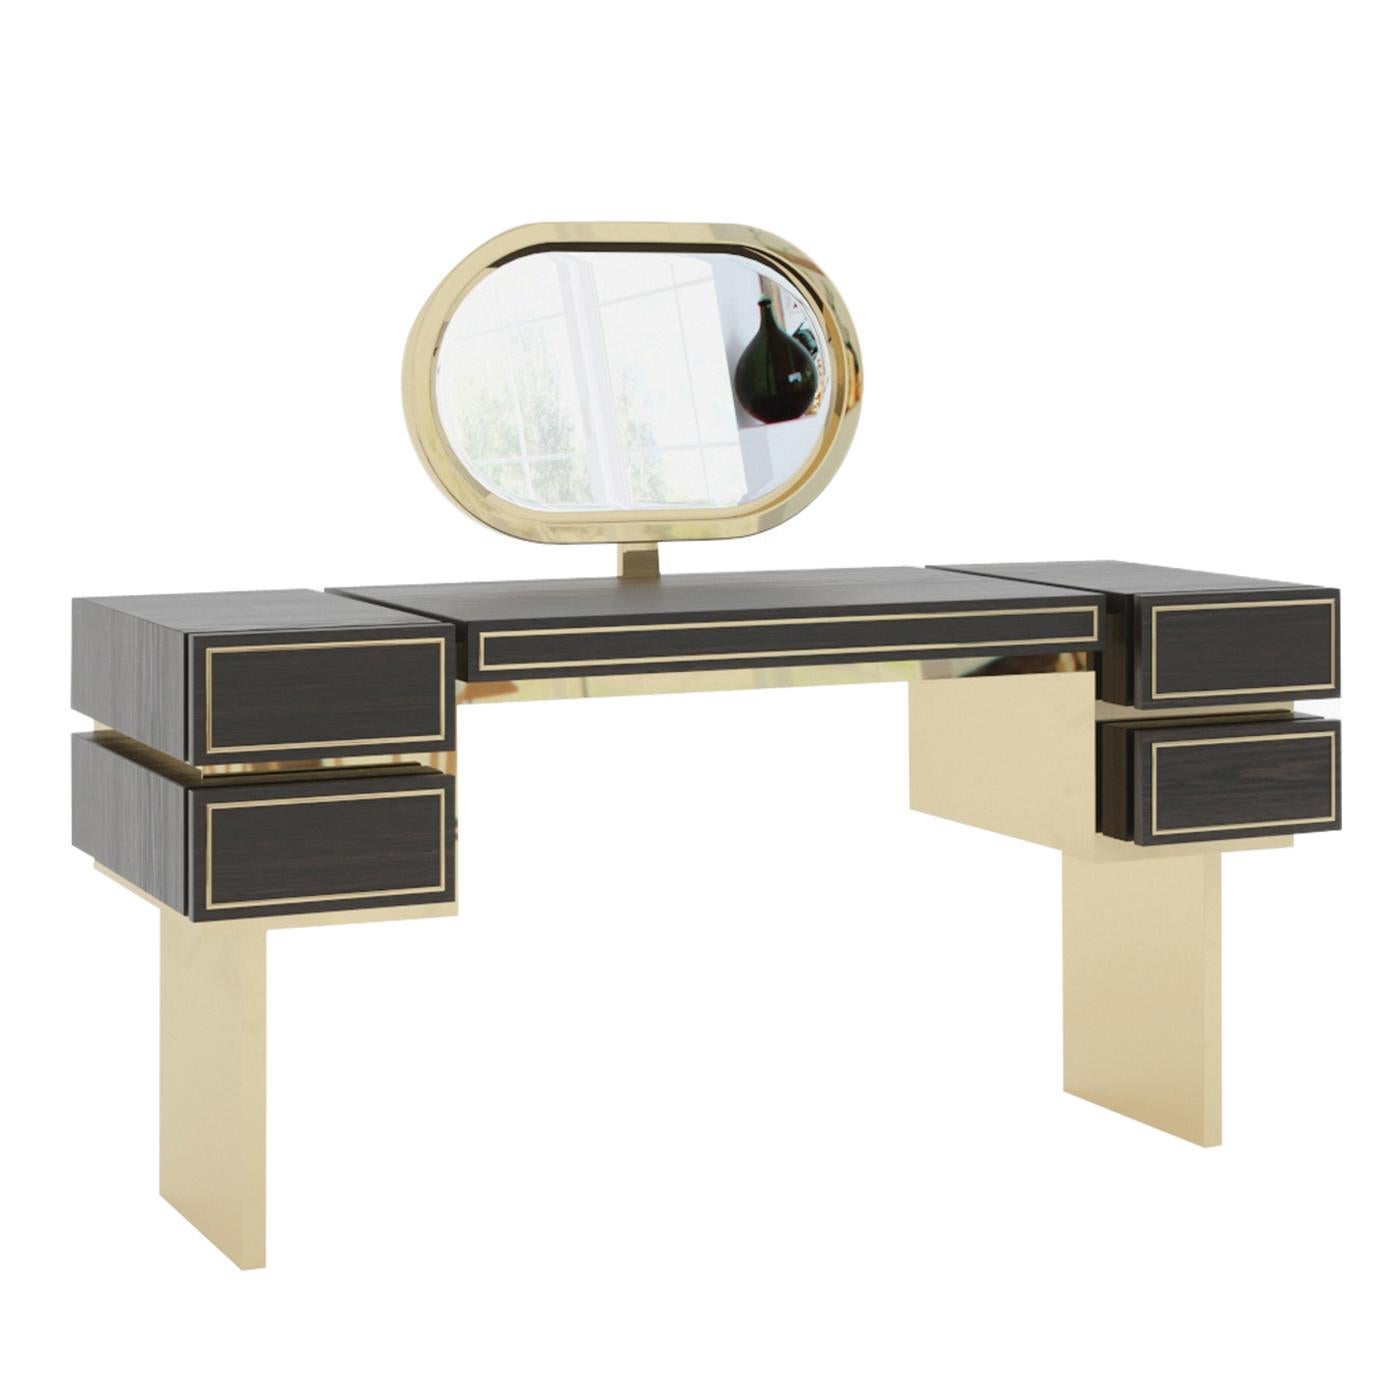 Equipped with a wide elliptical mirror, whose bright brass finish is shared by the two thin metal sheets sustaining the wooden top, this vanity table strikes with its well-balanced, angular silhouette. The top is crafted of solid wood and comprises